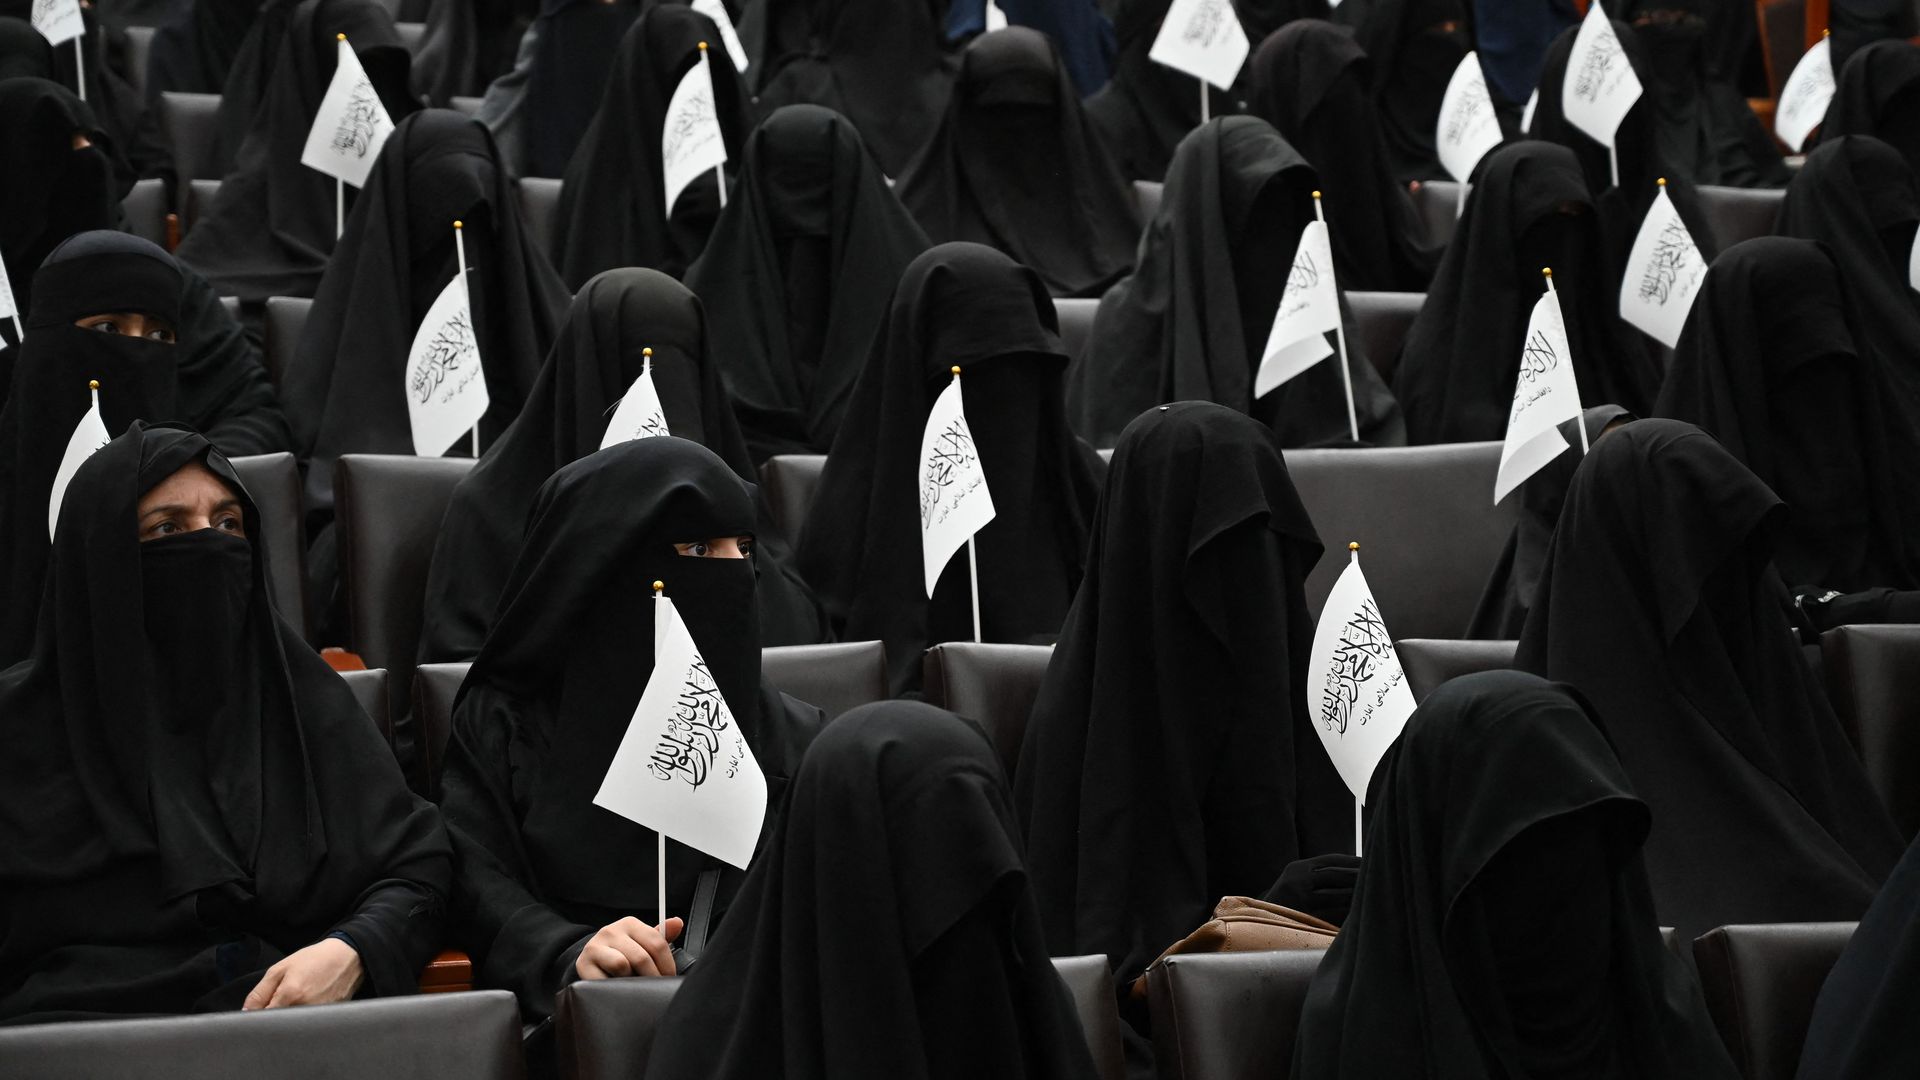 Veiled students hold Taliban flags as they listen women speakers before a pro-Taliban rally at the Shaheed Rabbani Education University in Kabul on September 11